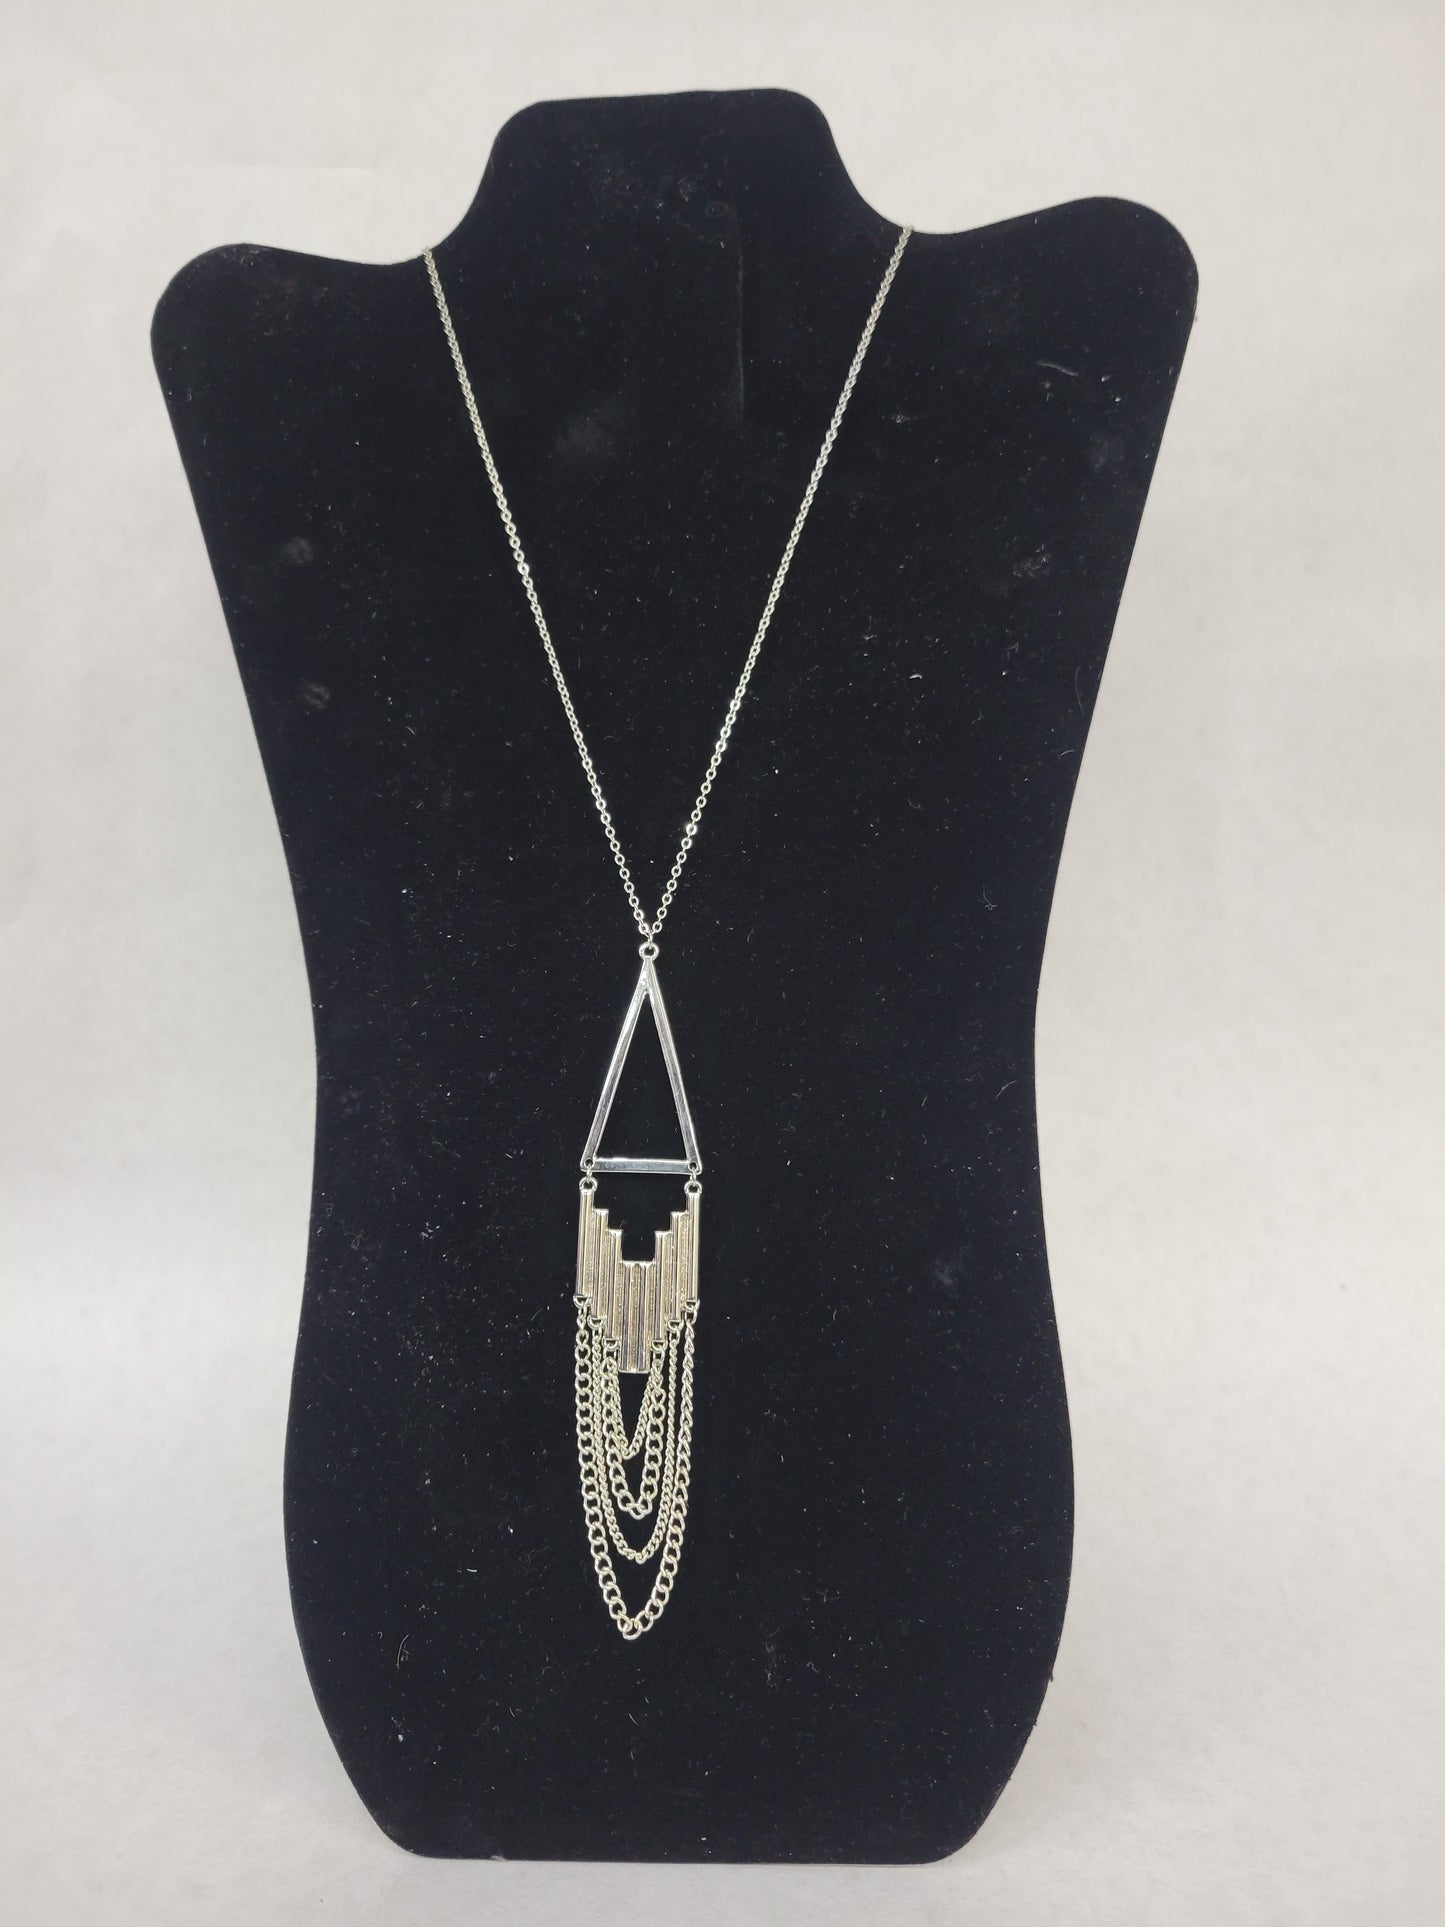 Long Silver Bar and Chain Necklace